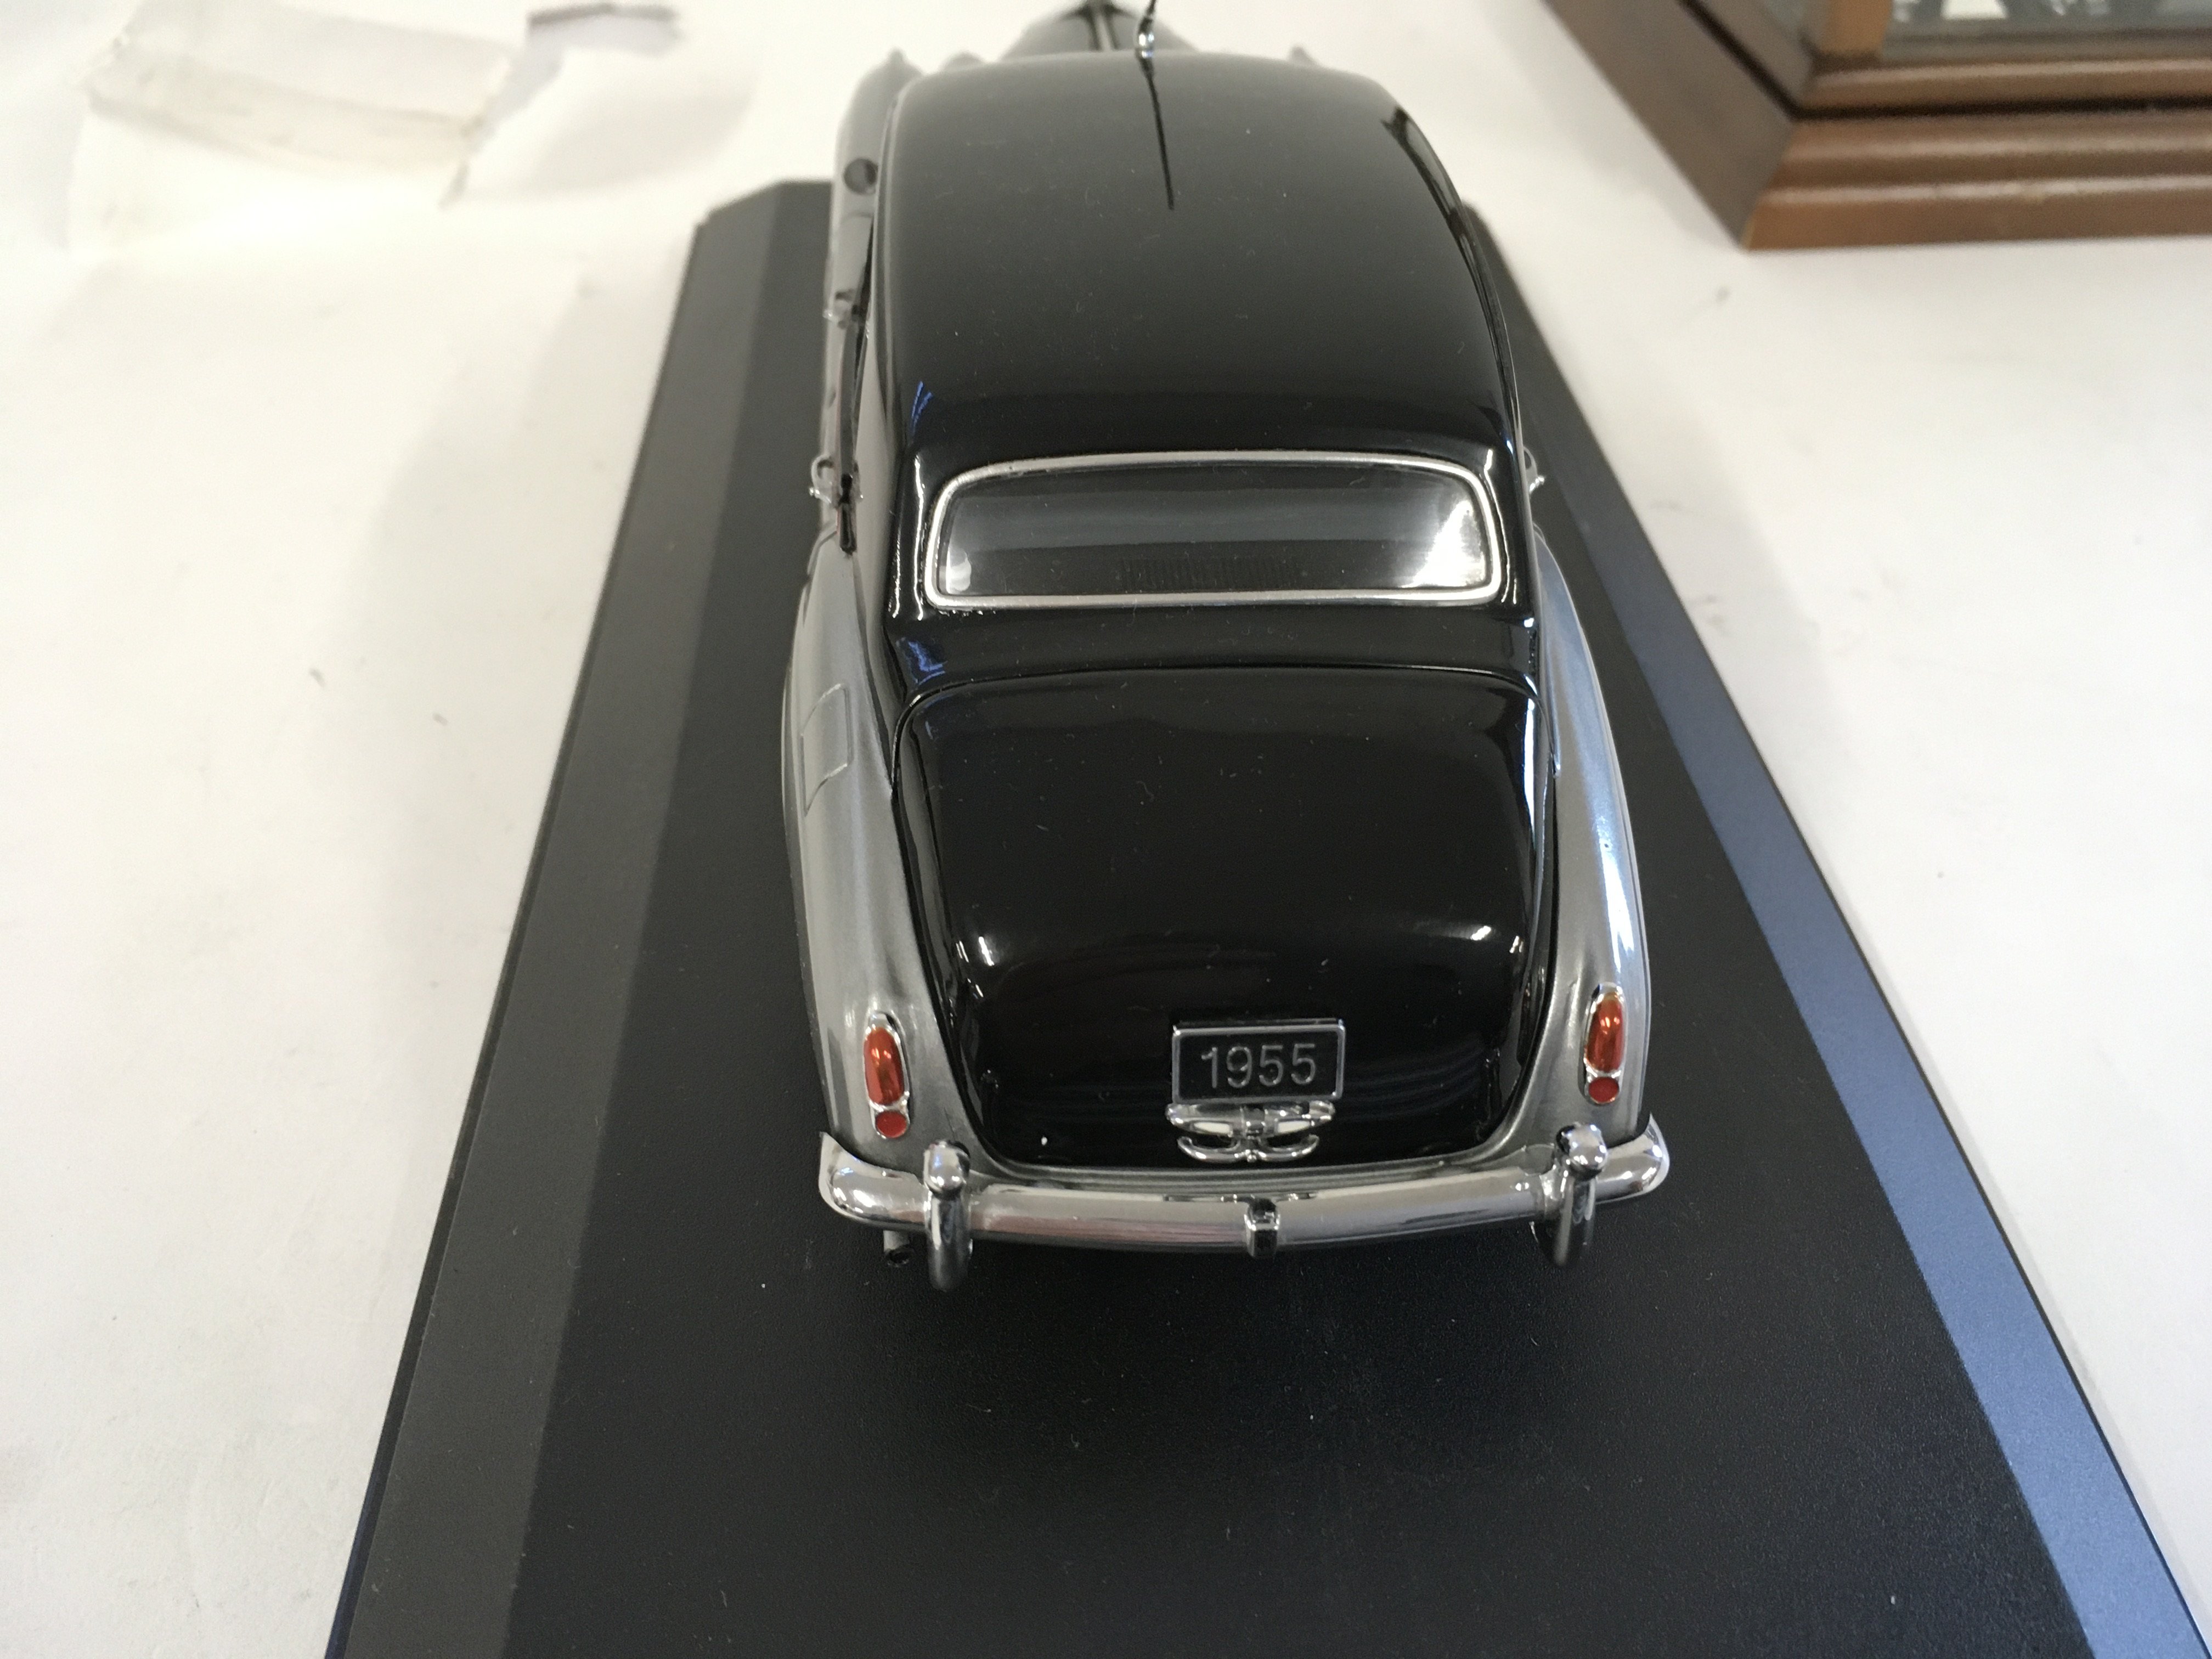 Three precision model cars by Franklin Mint both in presentation cases. Cars are 2 x RollsRoyce - Image 5 of 10